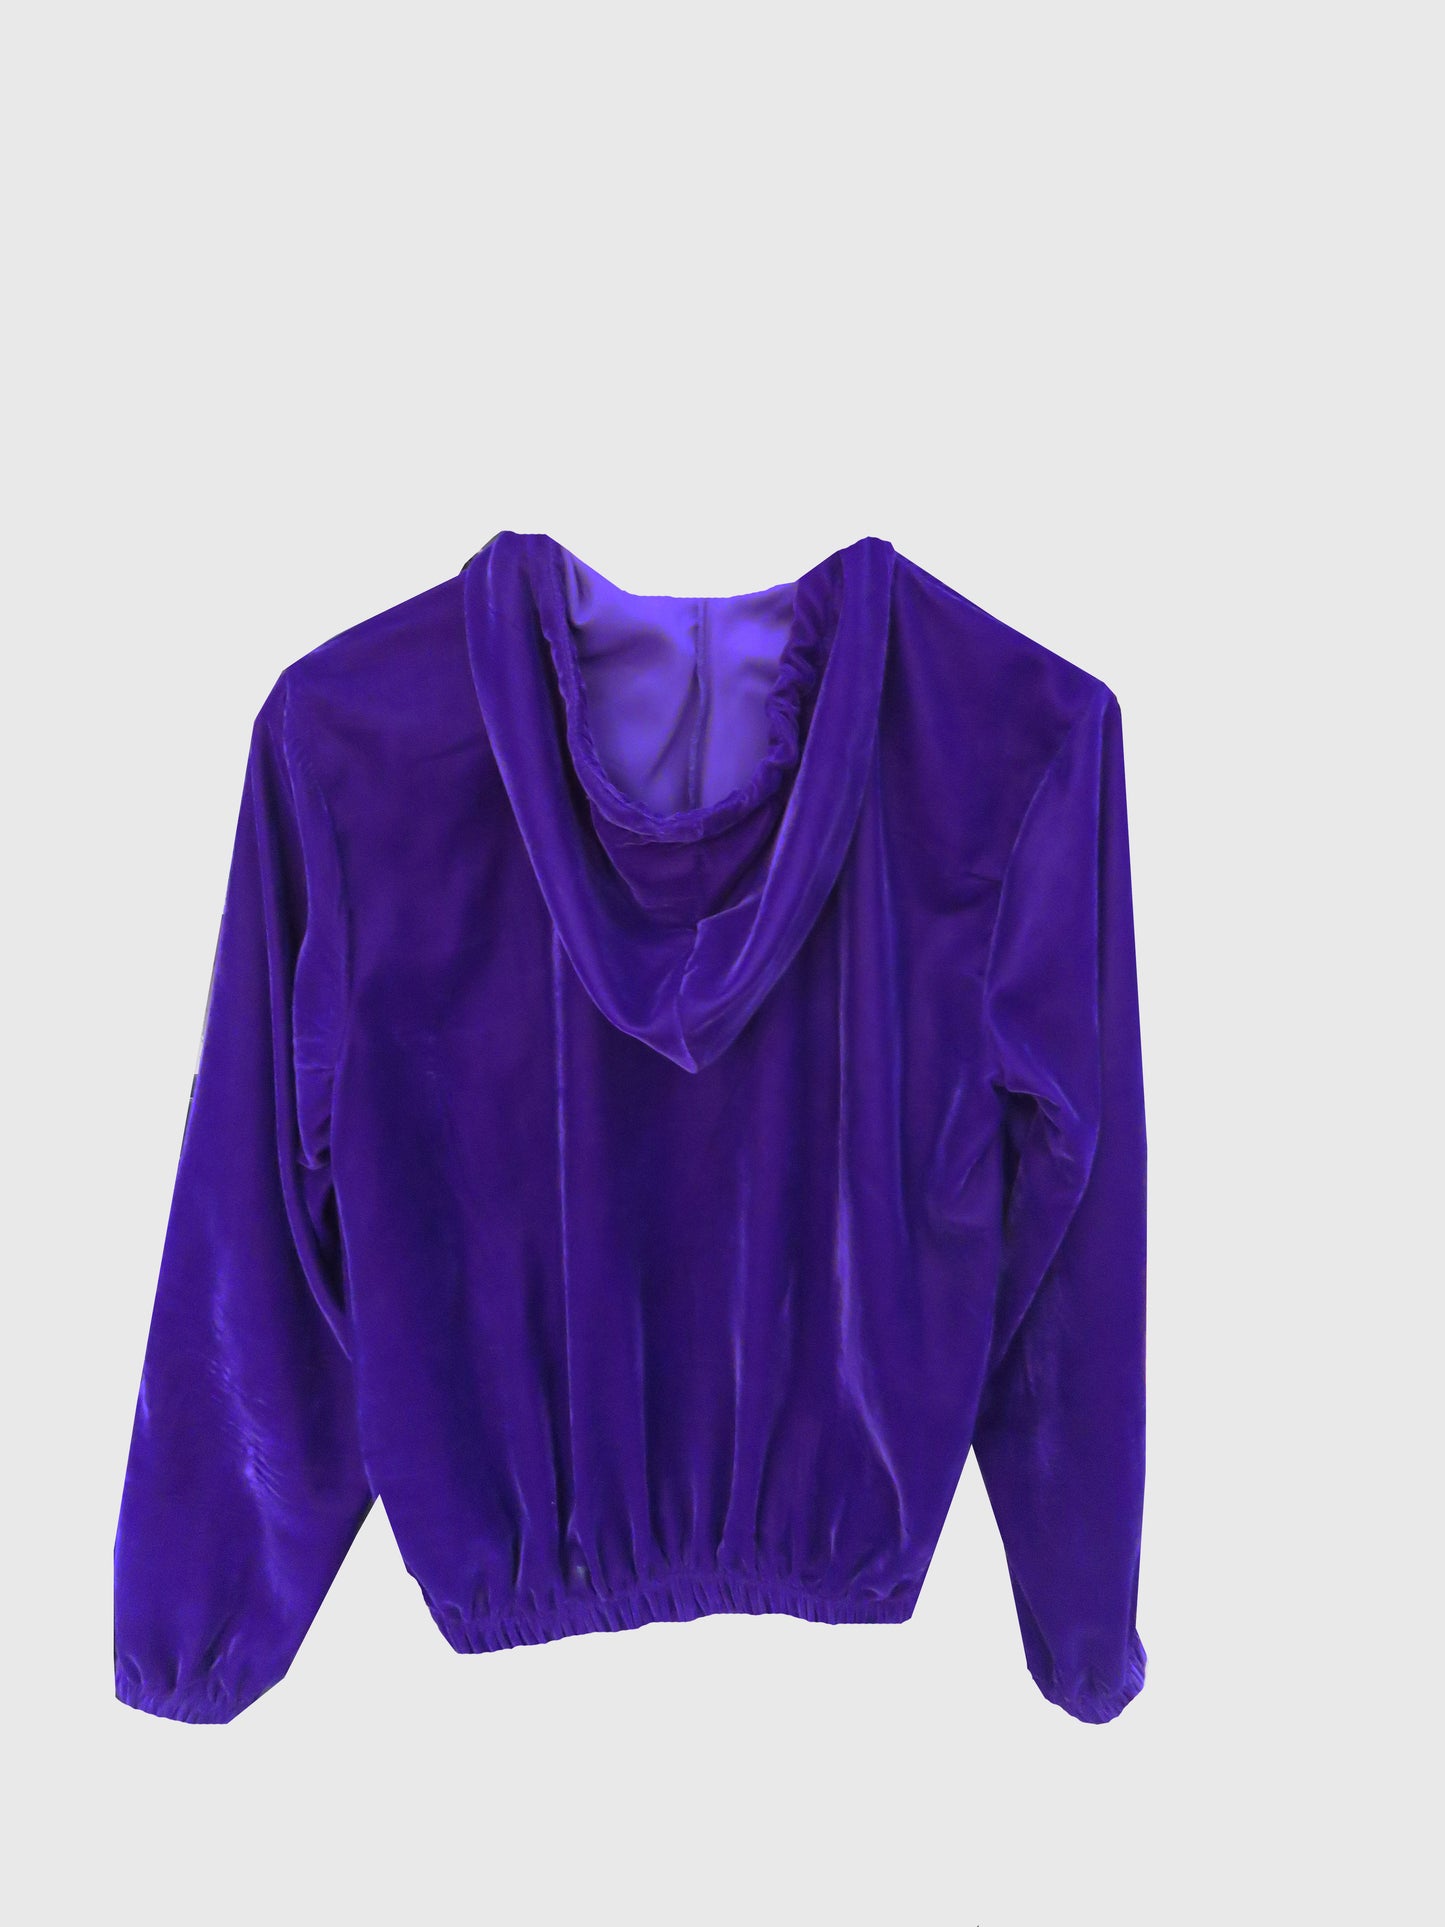 BRIGHT PURPLE TRACK SUIT WITH HOODIE, EVERDAY LOUNGEWEAR